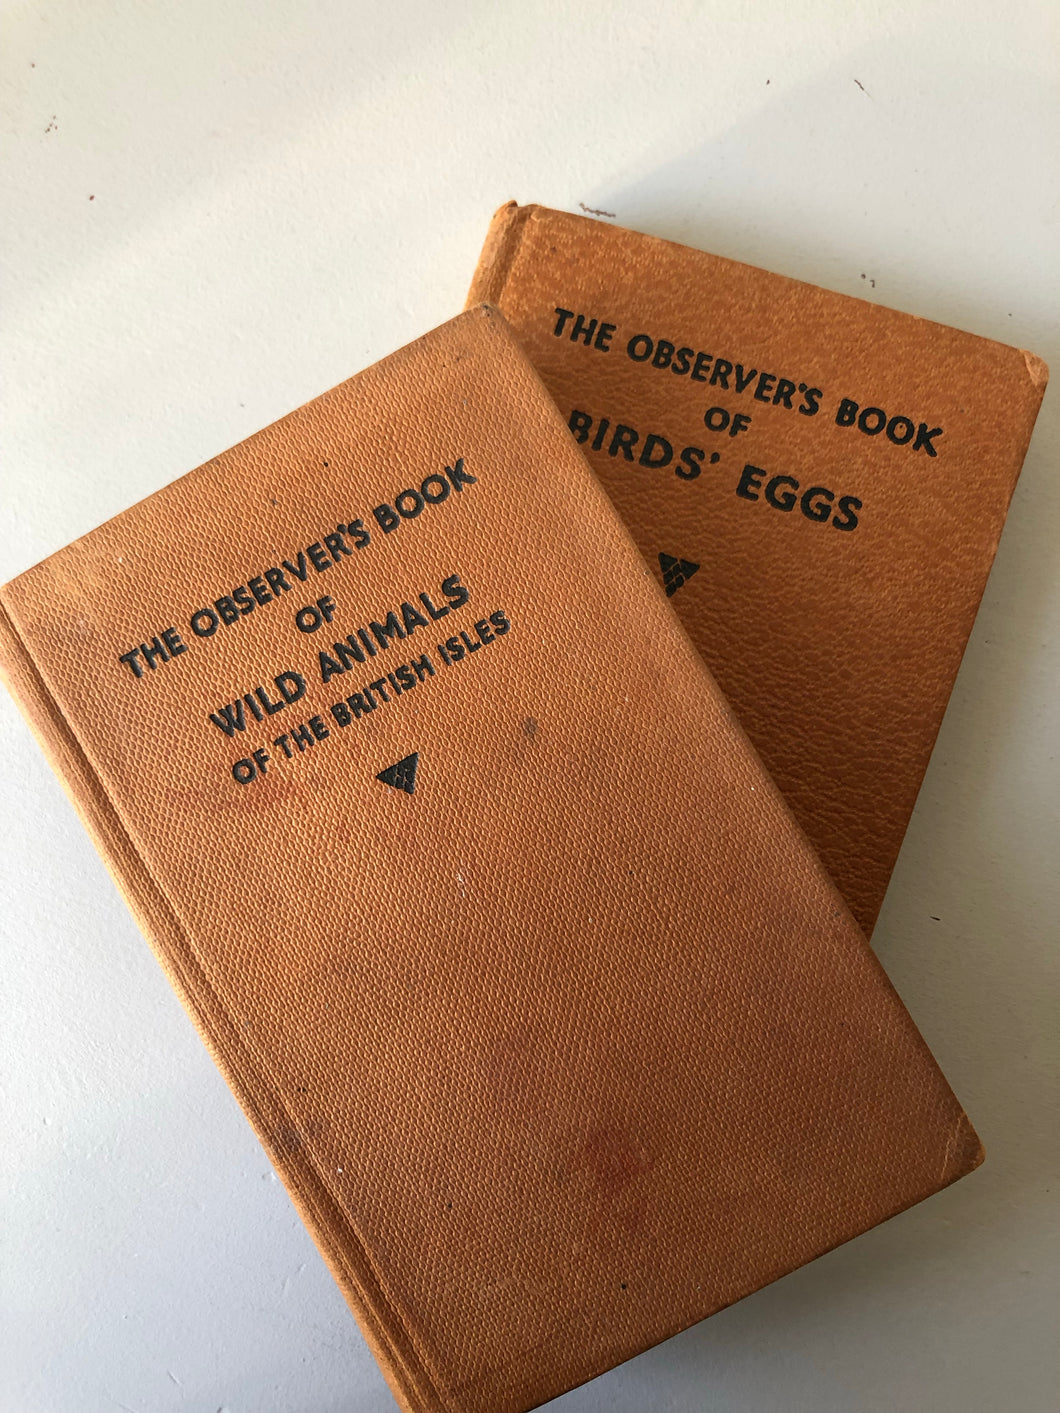 NEW - Pair of Observer Books, Birds Eggs and Wild Animals